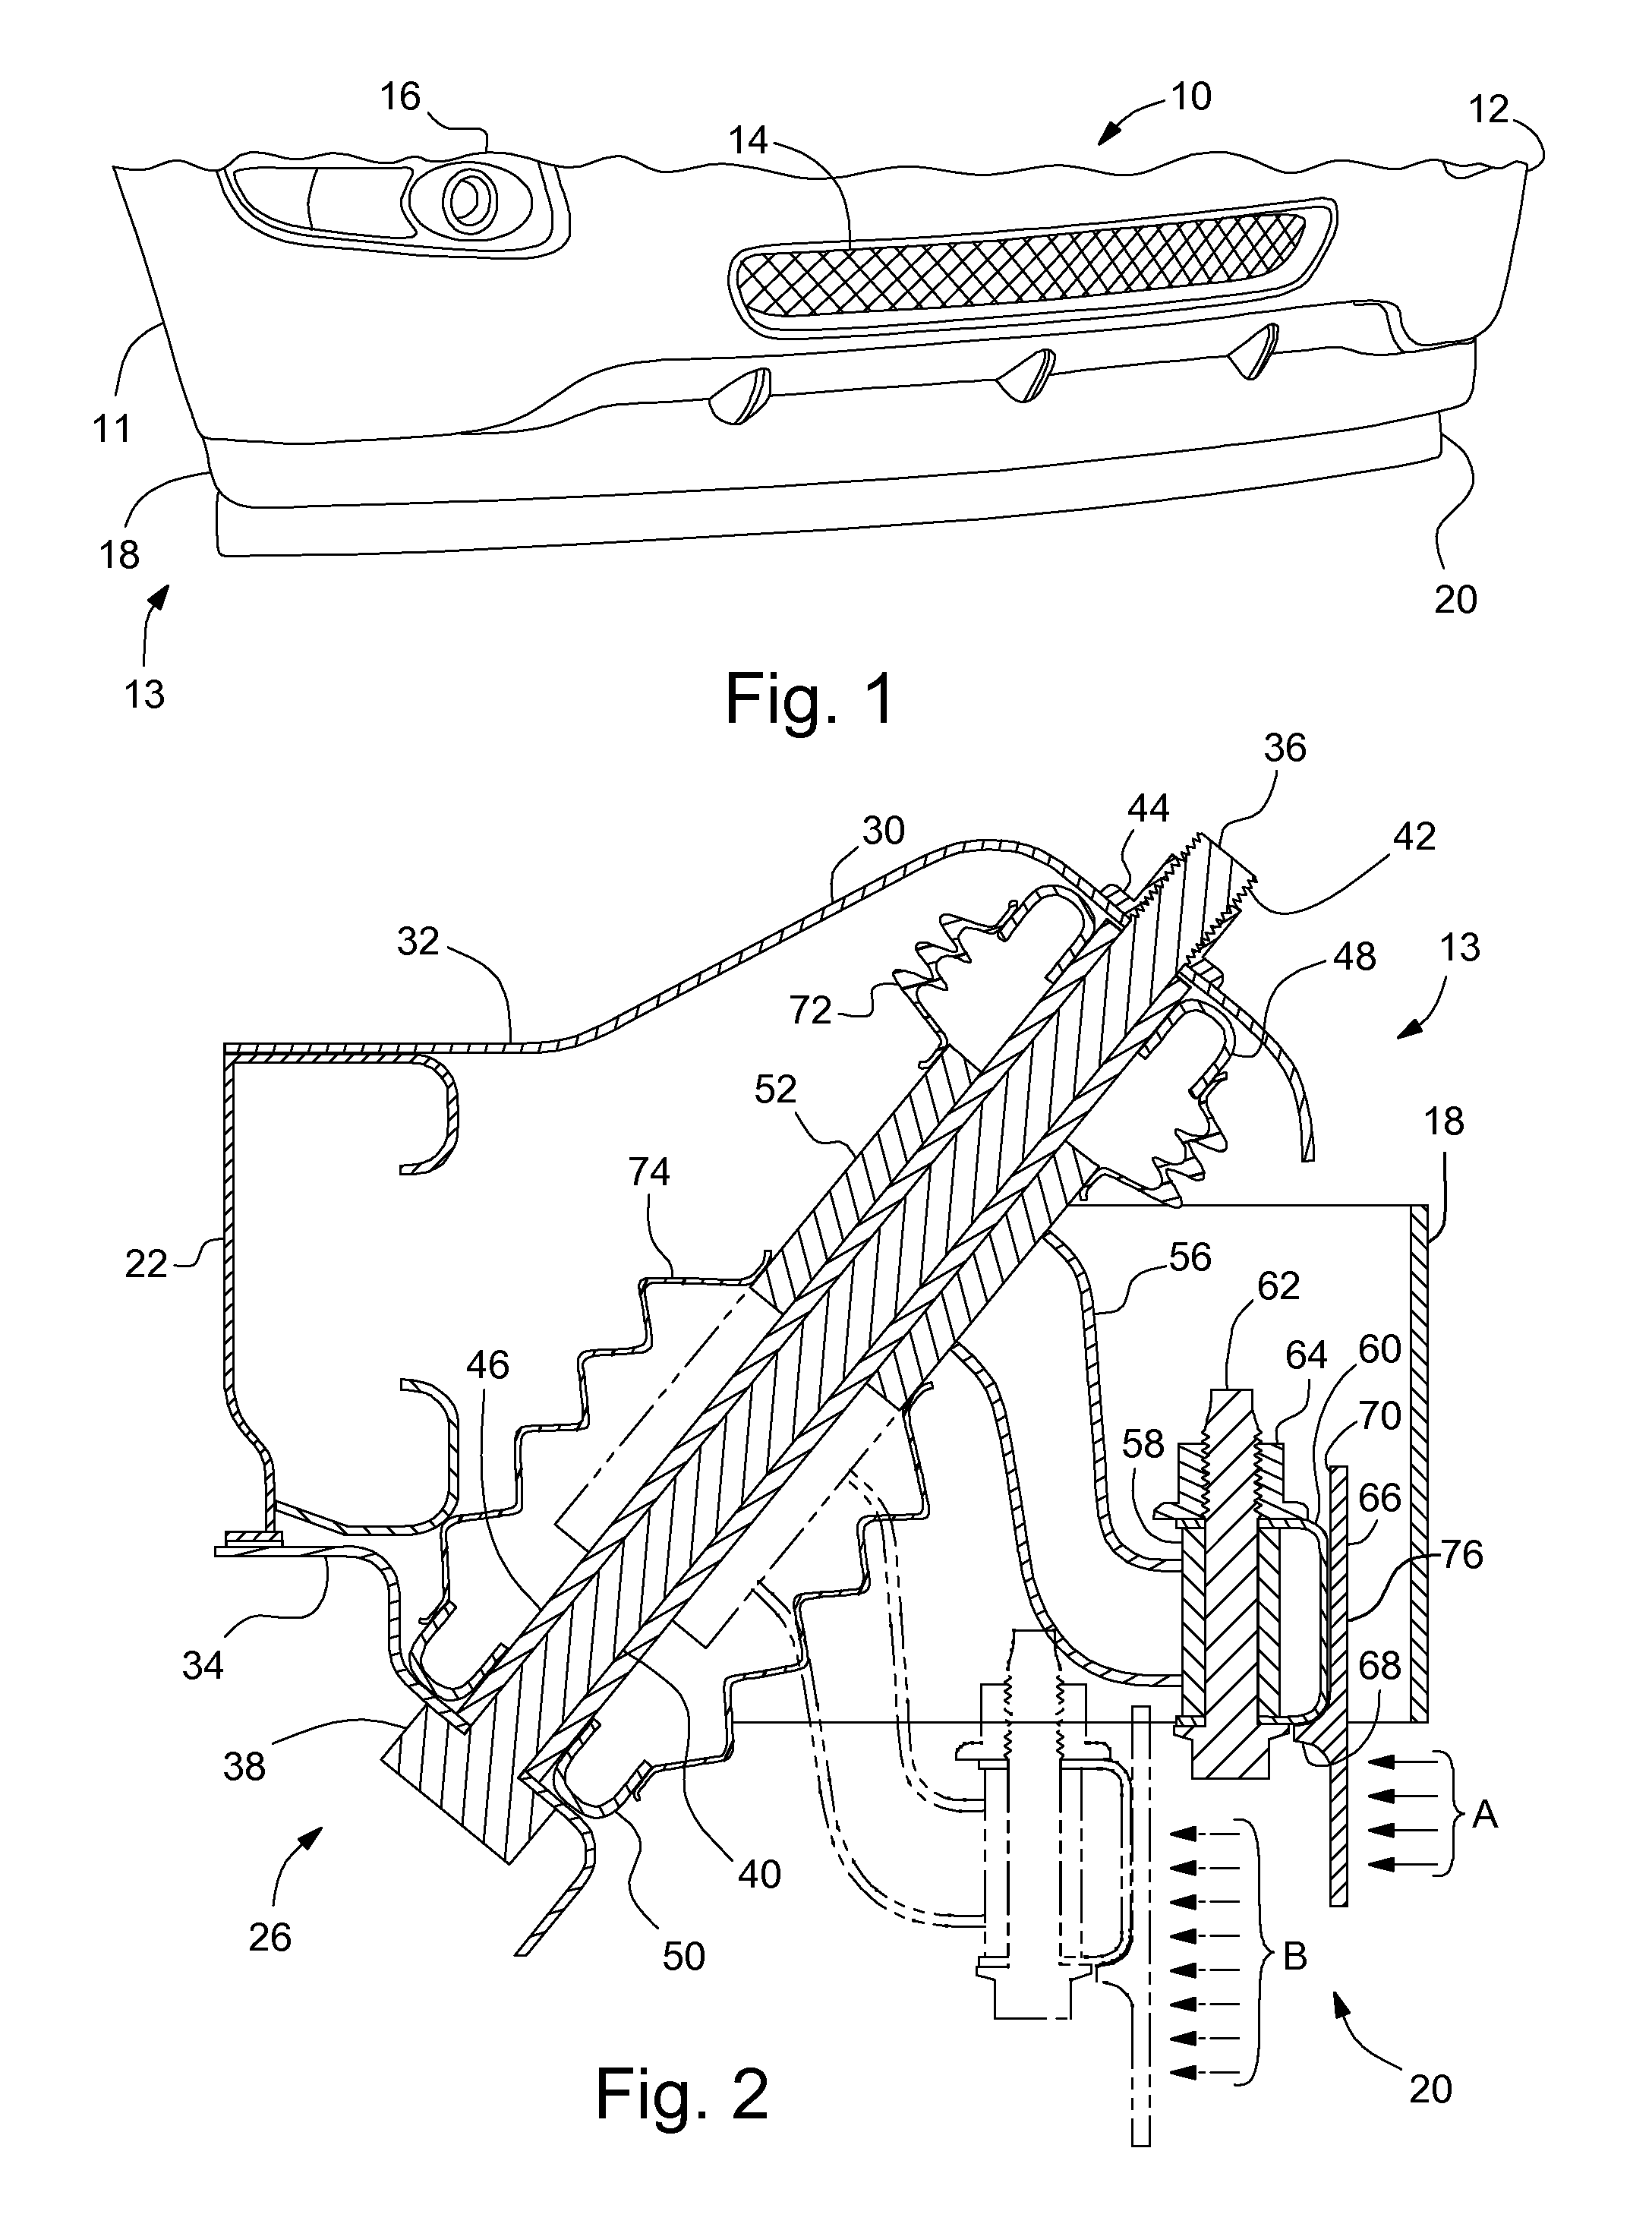 Passively deployable air dam for a vehicle